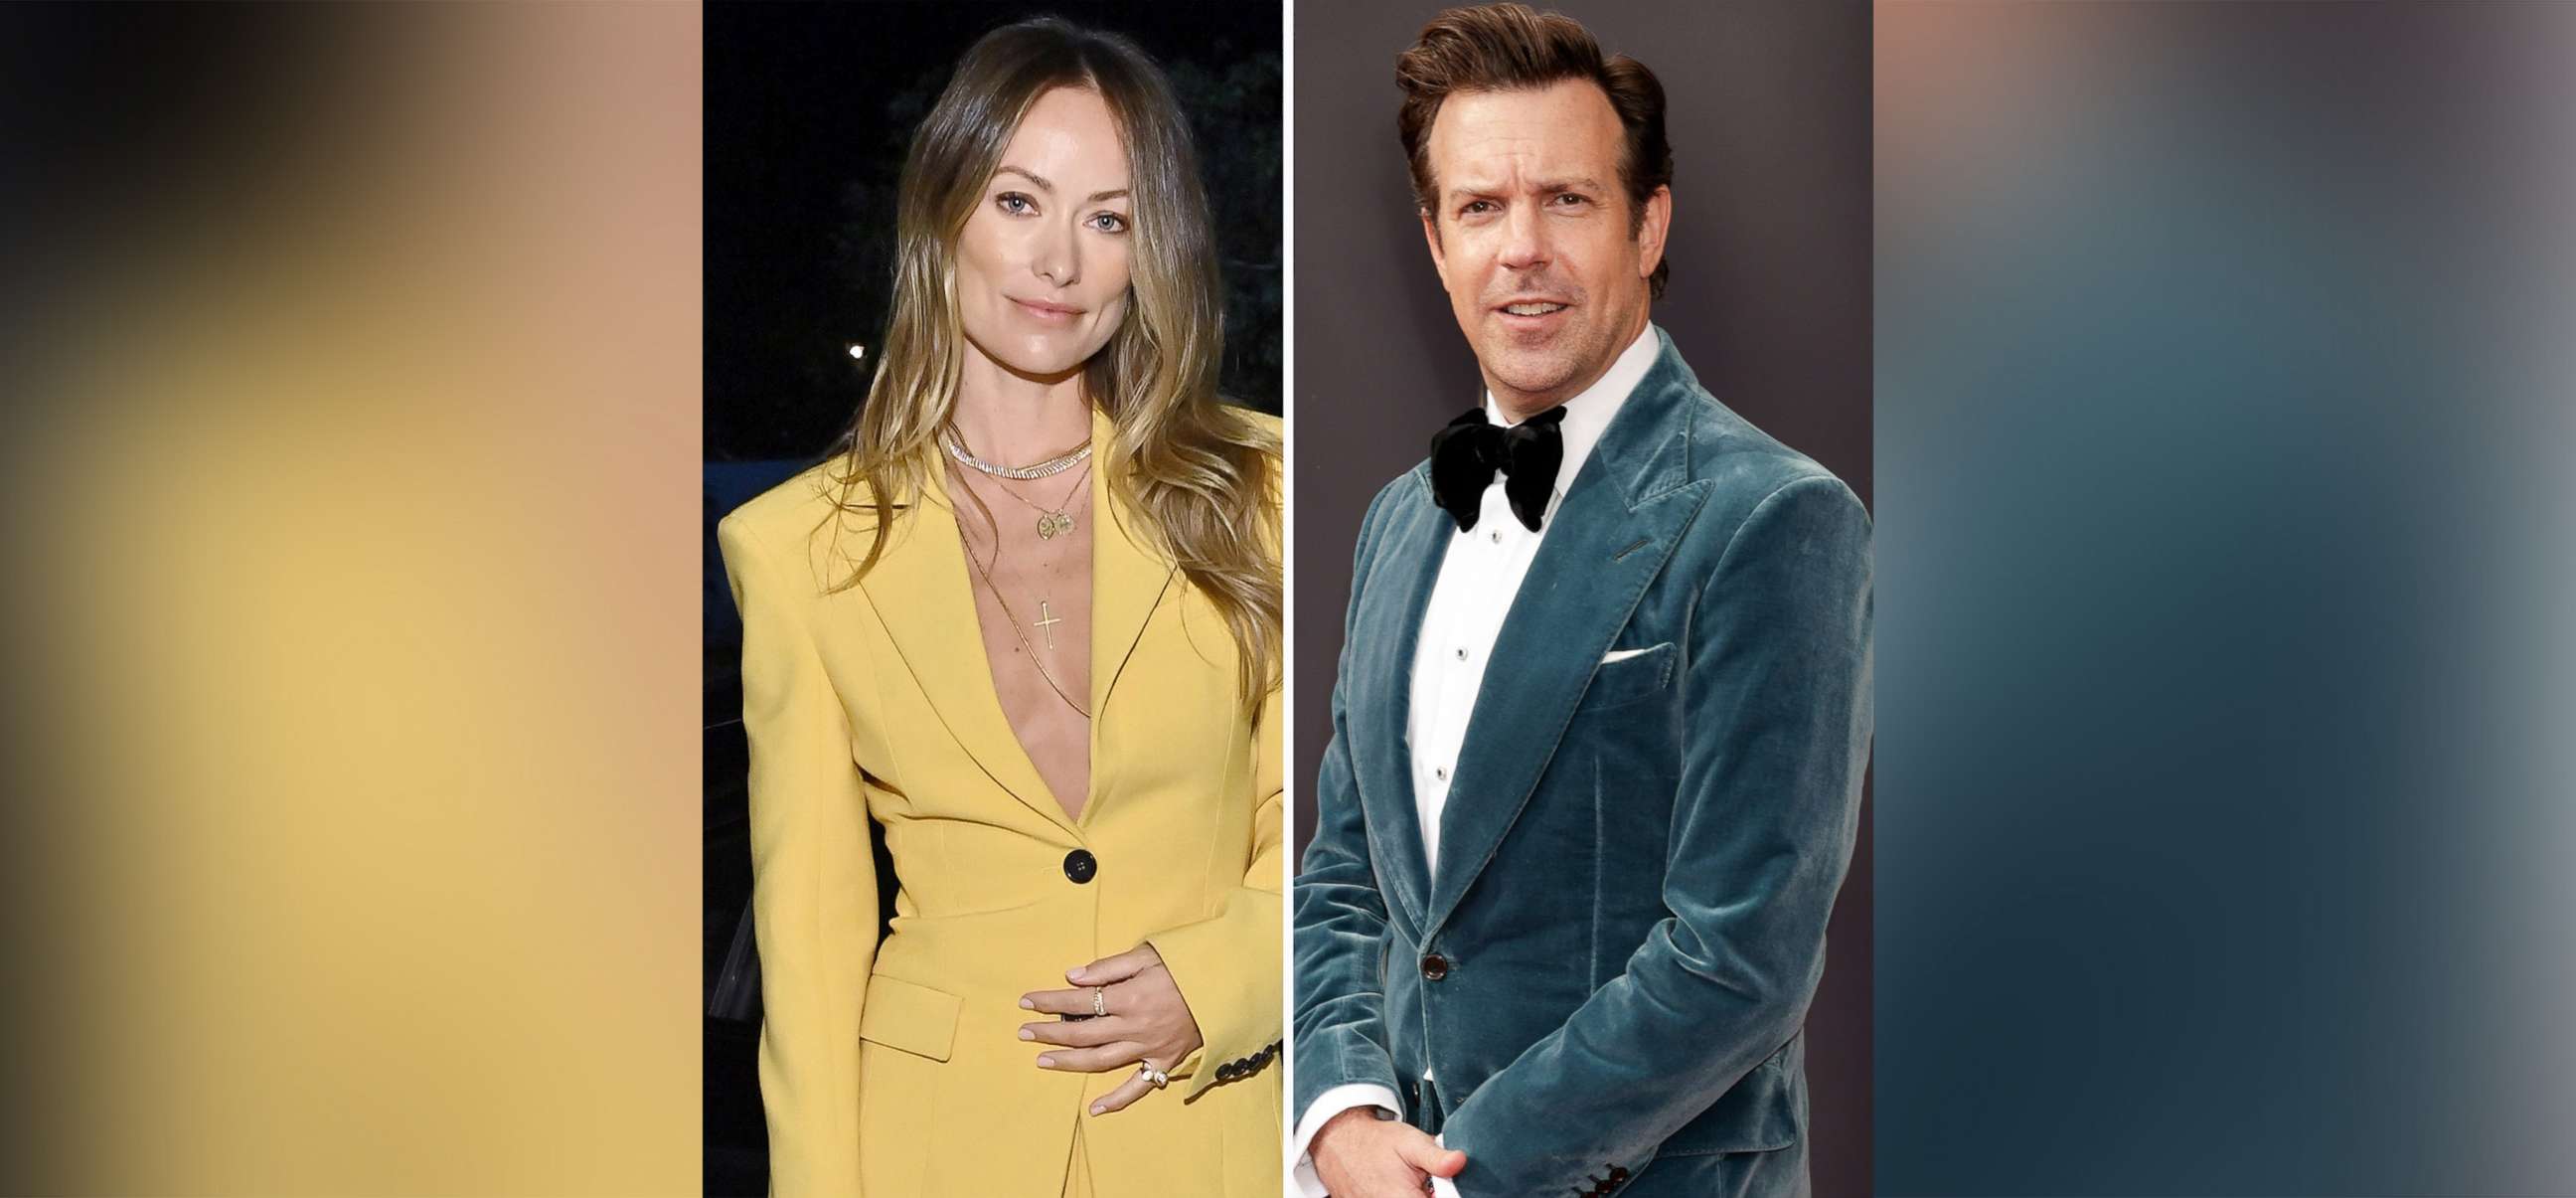 PHOTO: Olivia Wilde and Jason Sudeikis are pictured in a composite file image.